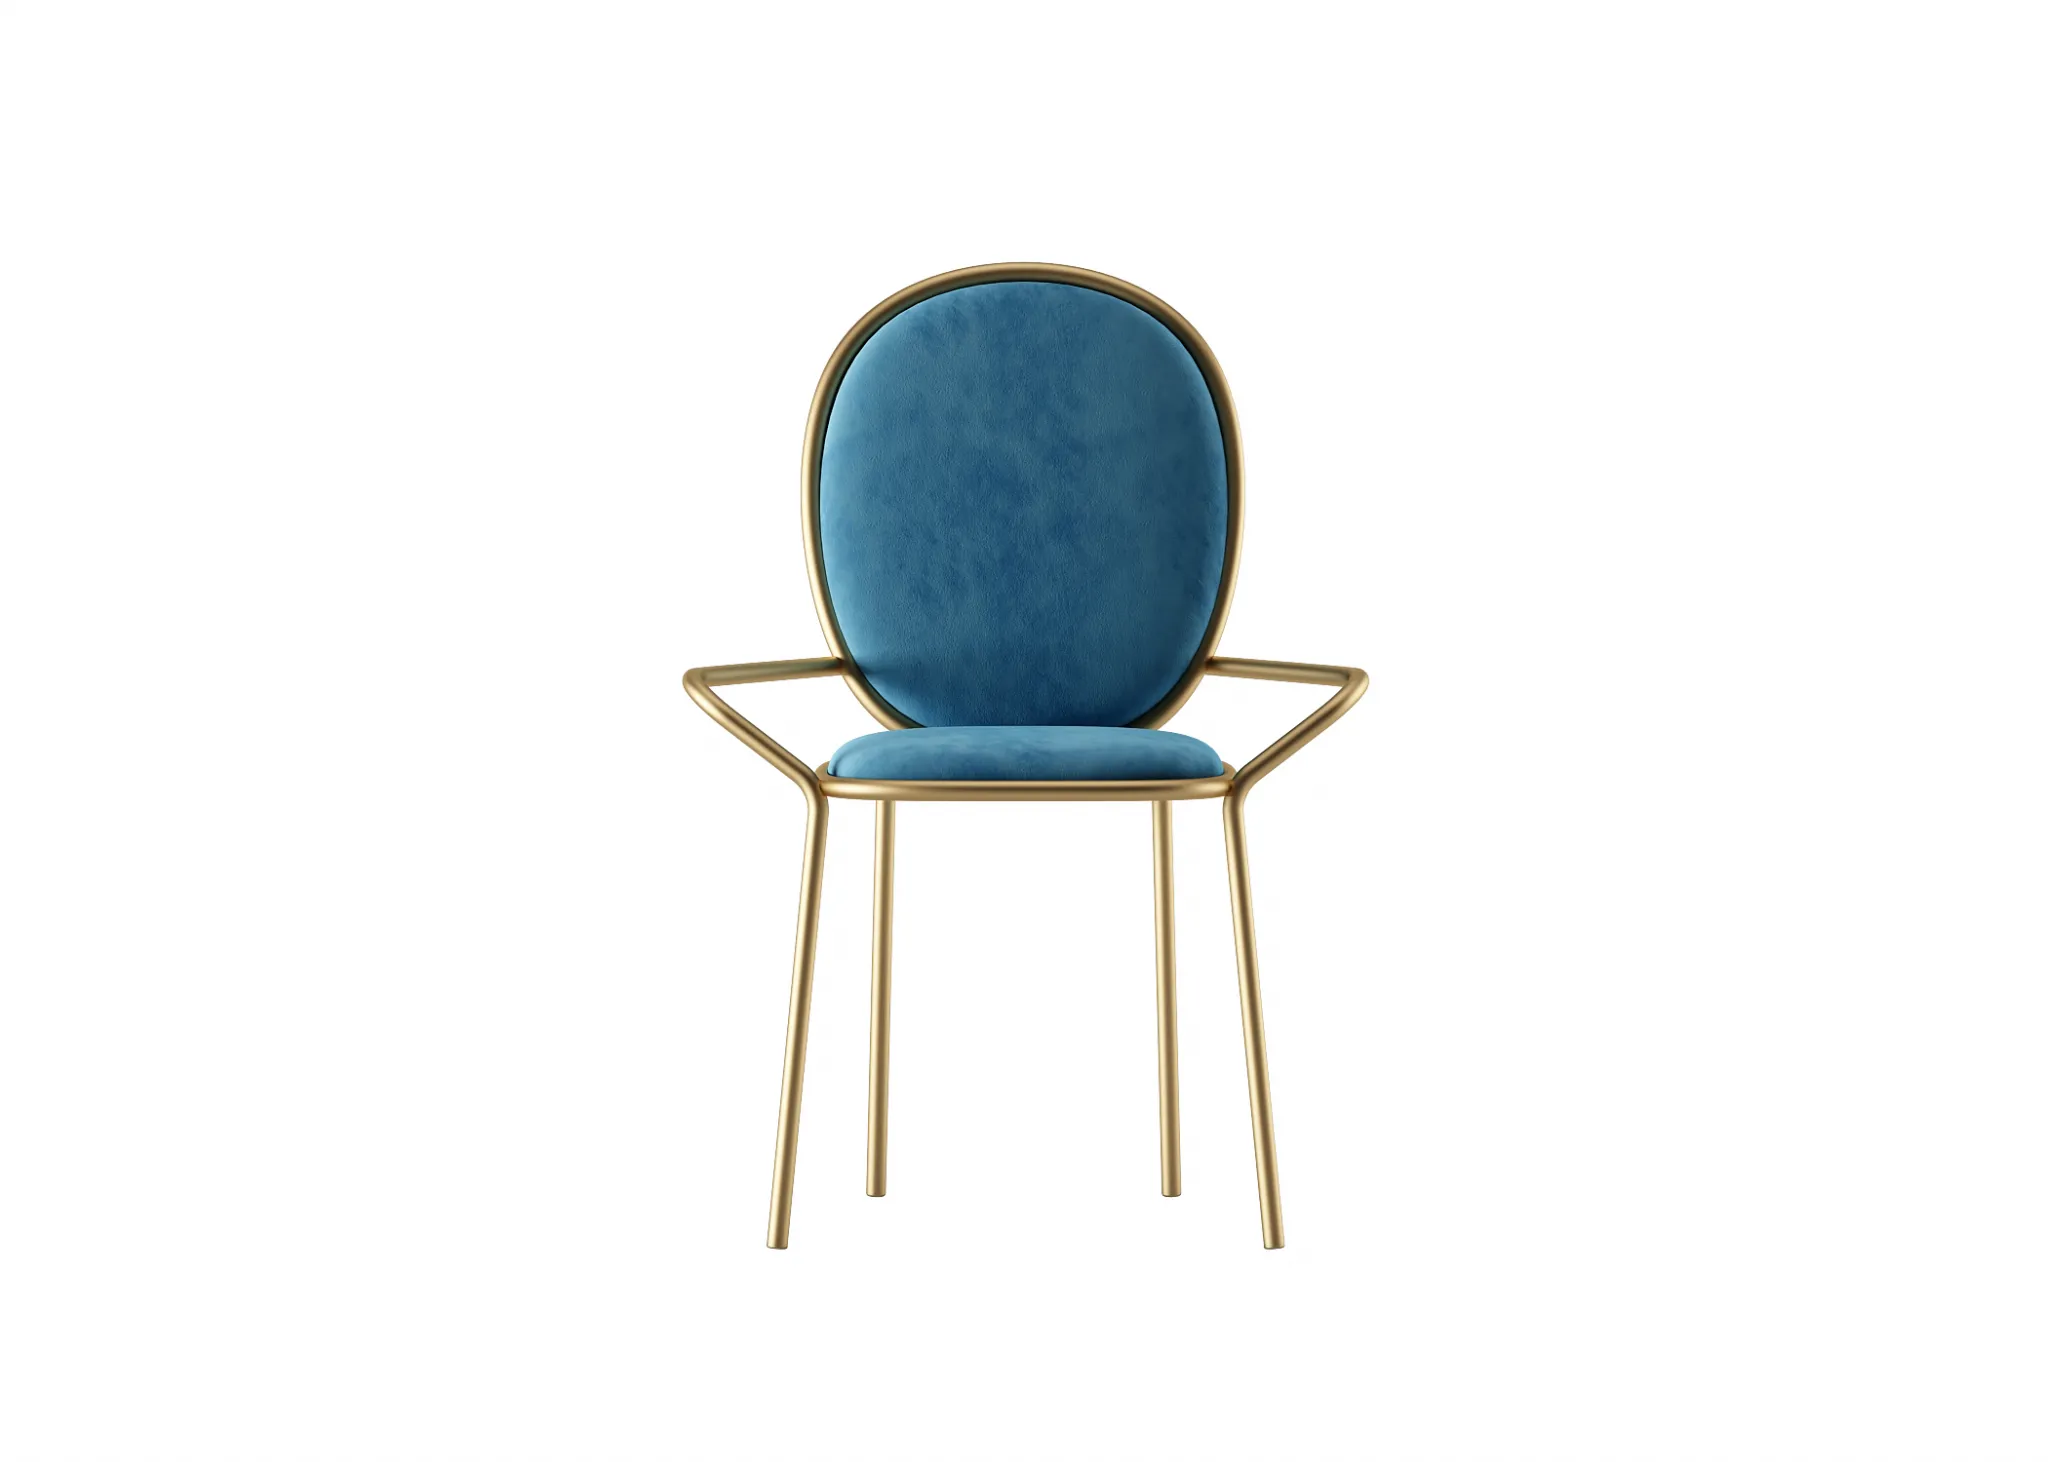 FURNITURE 3D MODELS – CHAIRS – 0143